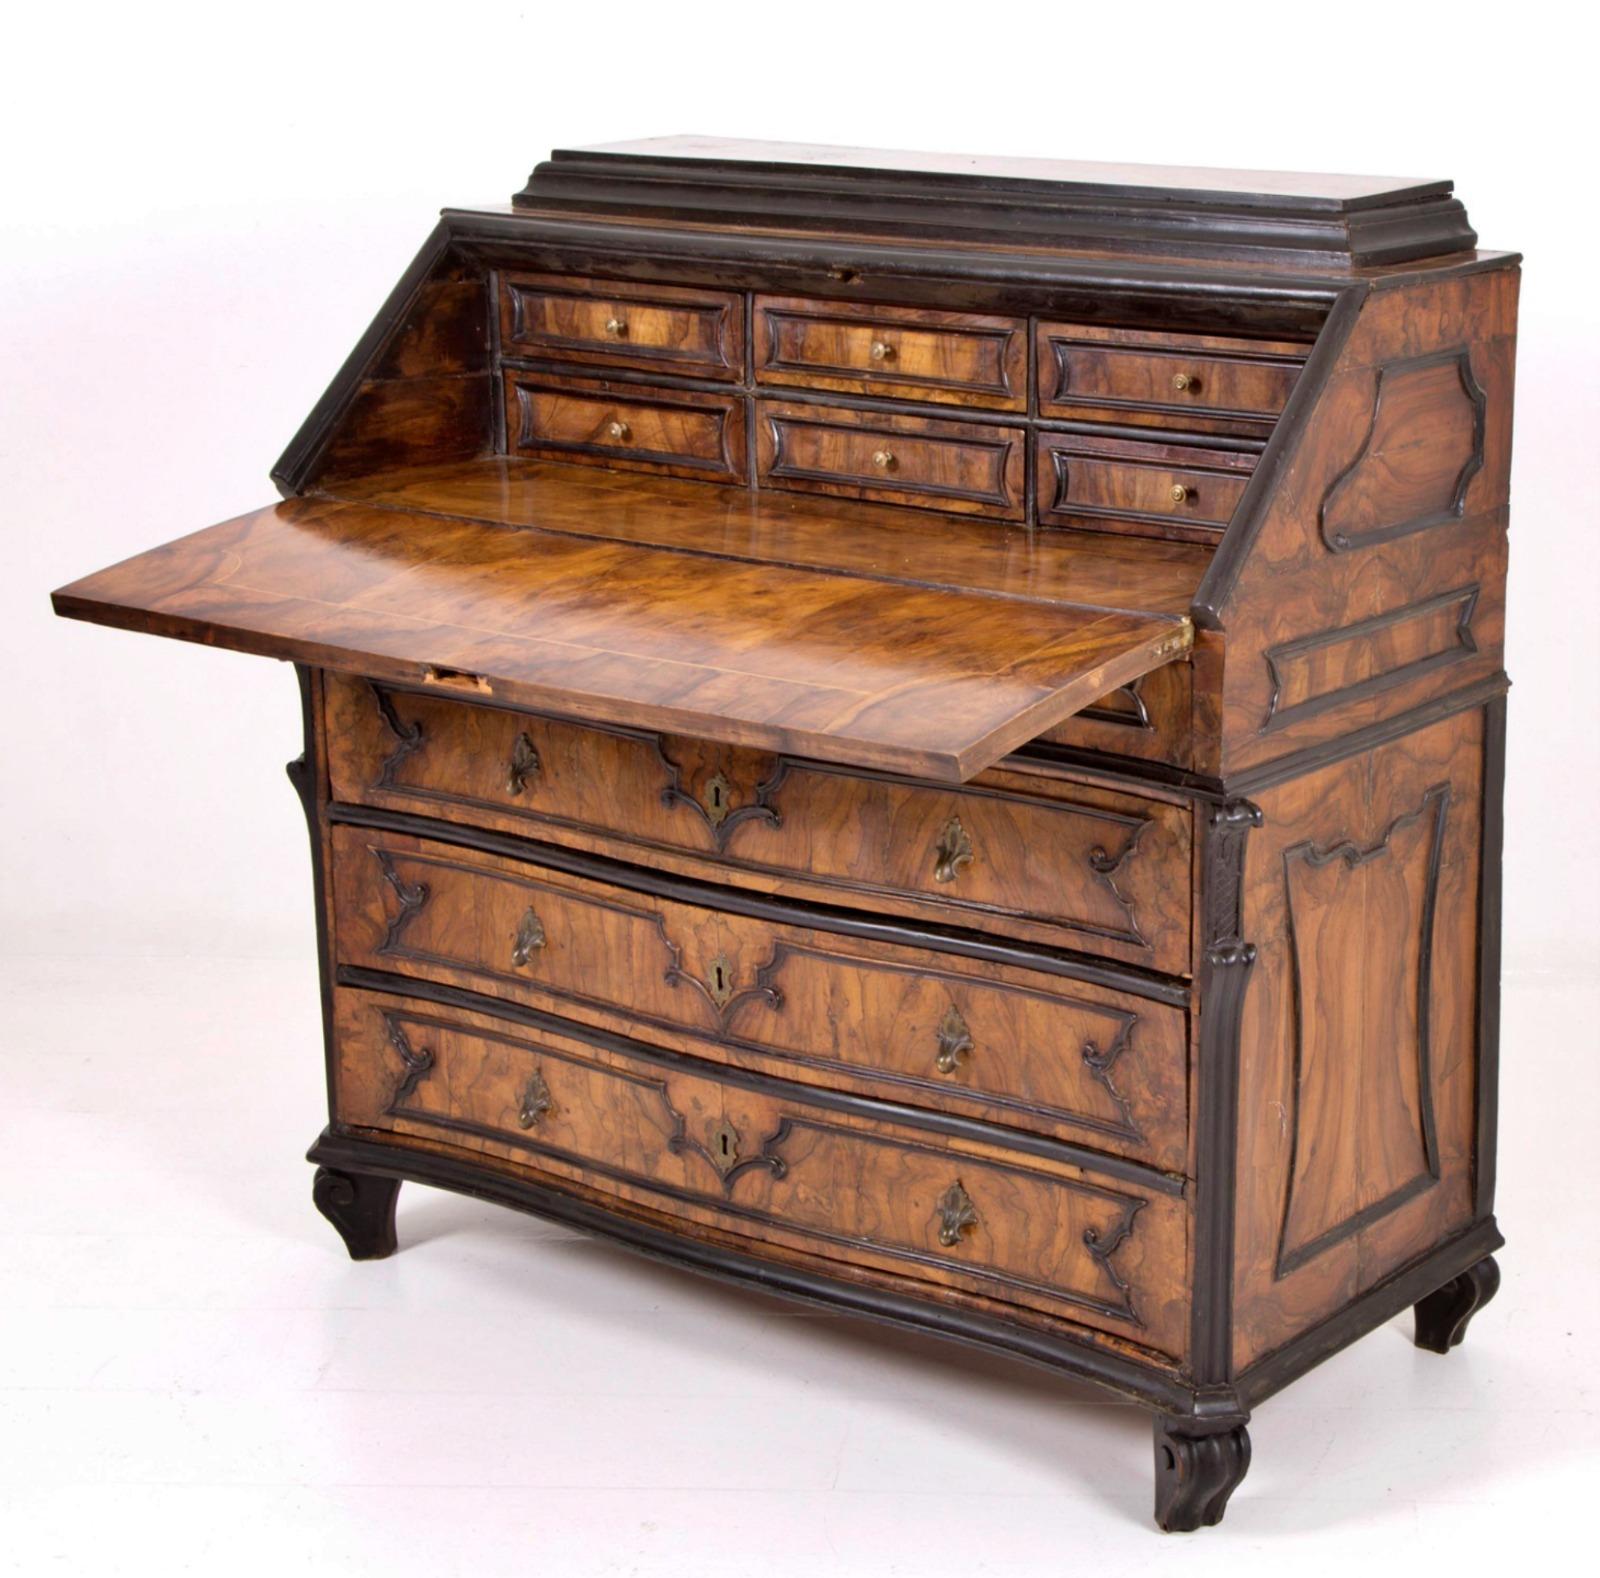 Italian Veneered Flap in Walnut and Burr Walnut with Lombardy 18th Century For Sale